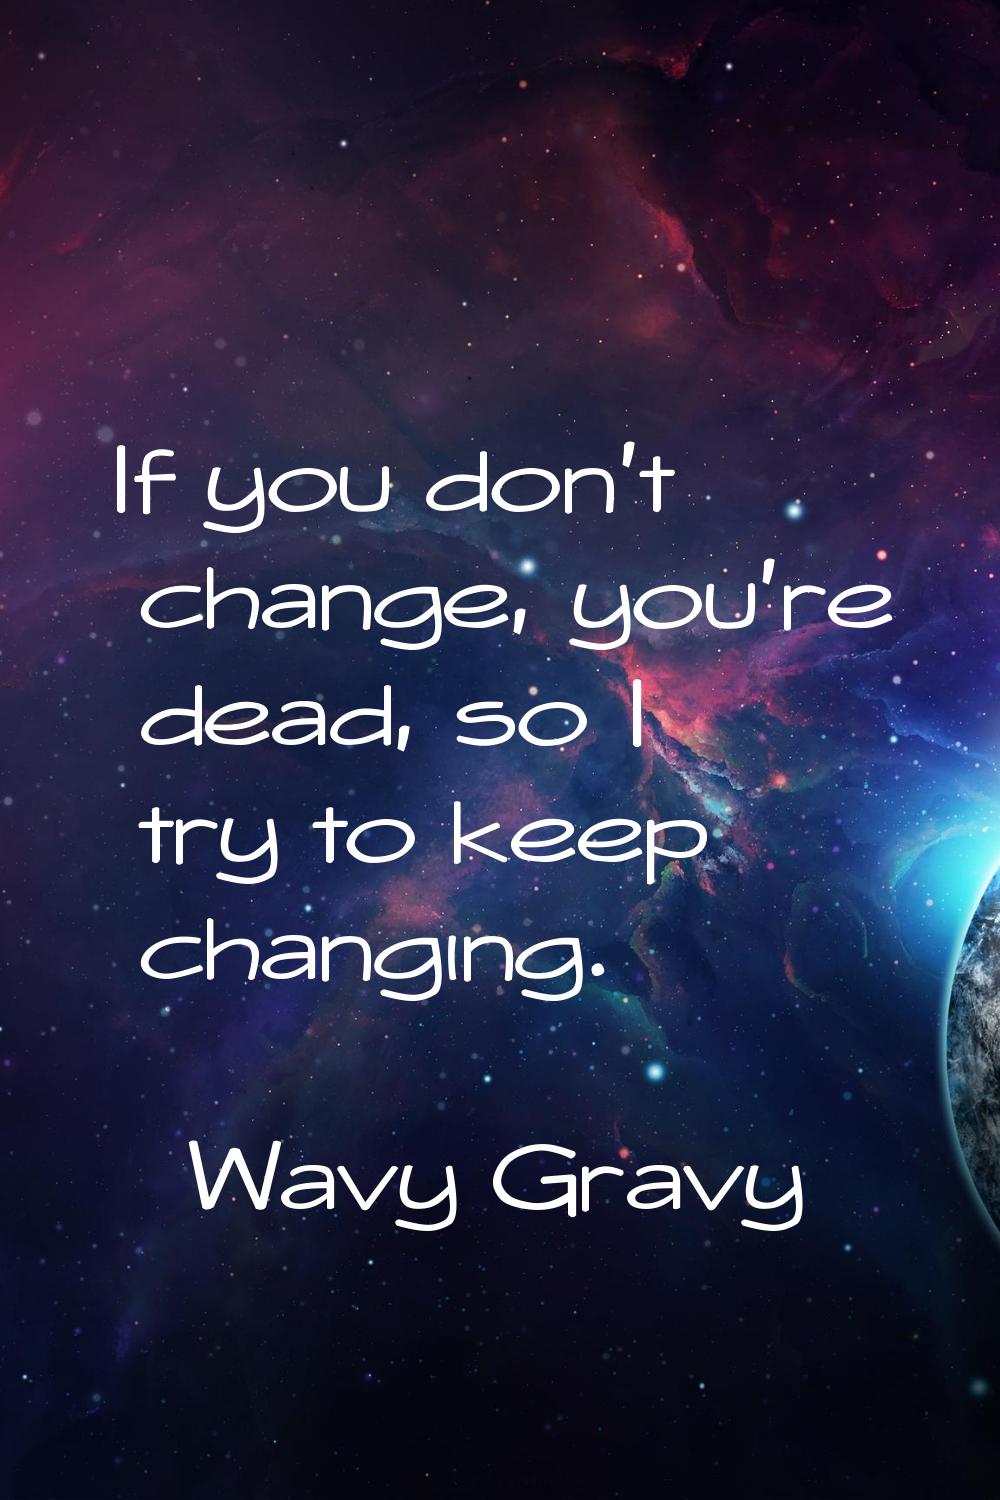 If you don't change, you're dead, so I try to keep changing.